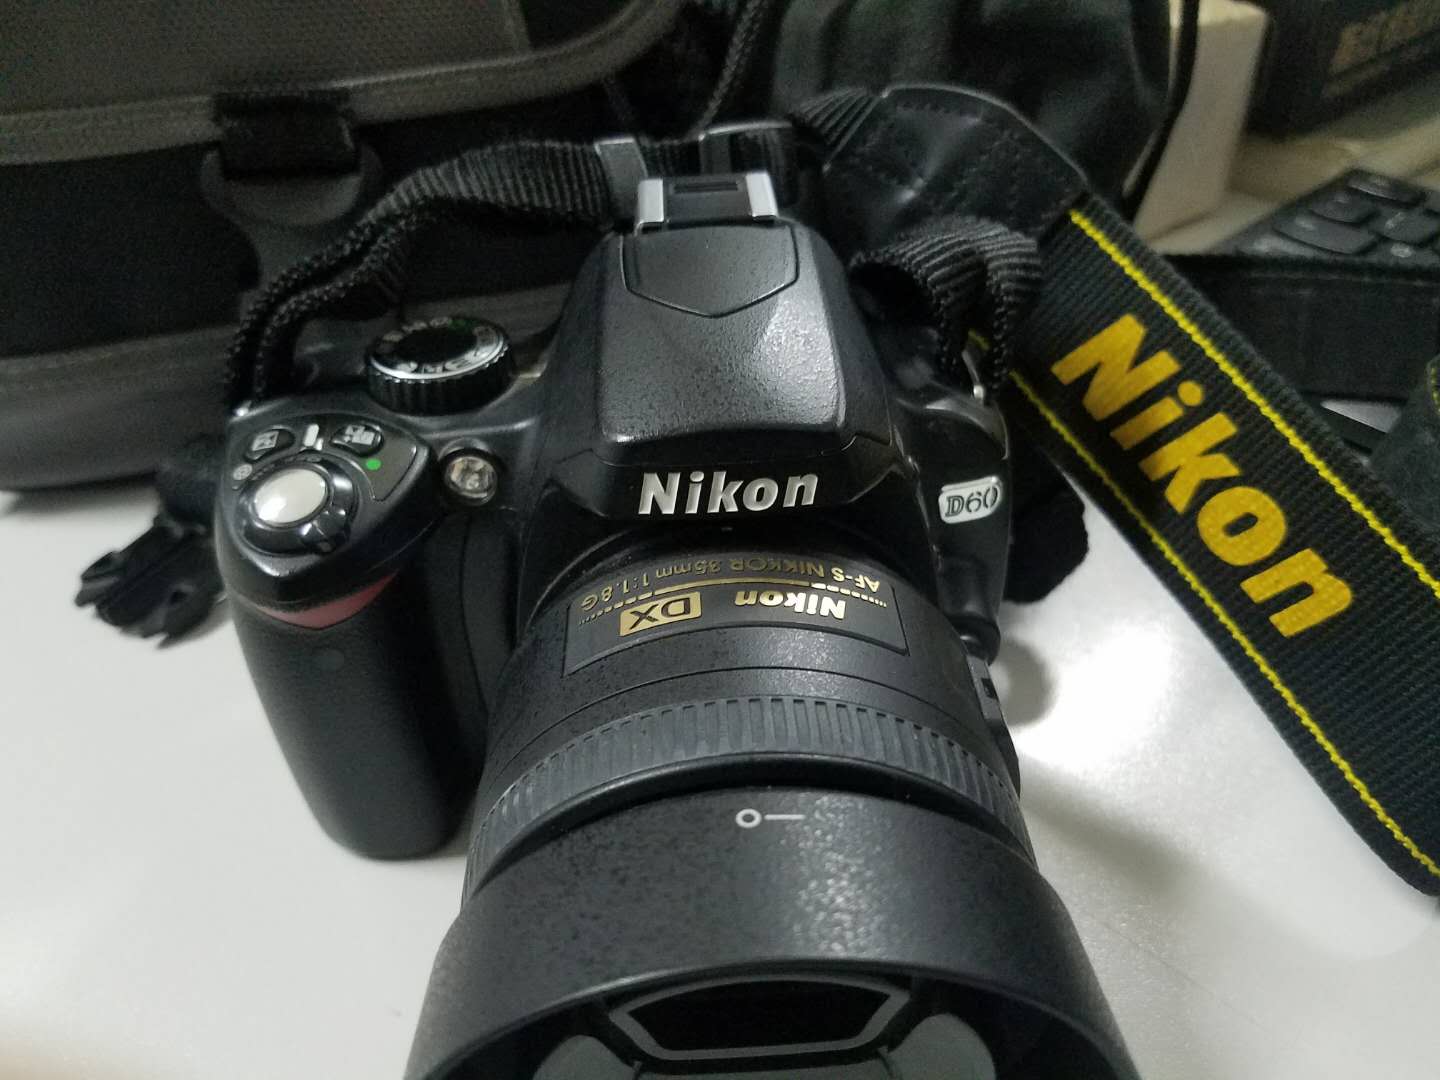  NIKON D60 with 15-55mm socket and 35mm 1.8G fixed focus lens